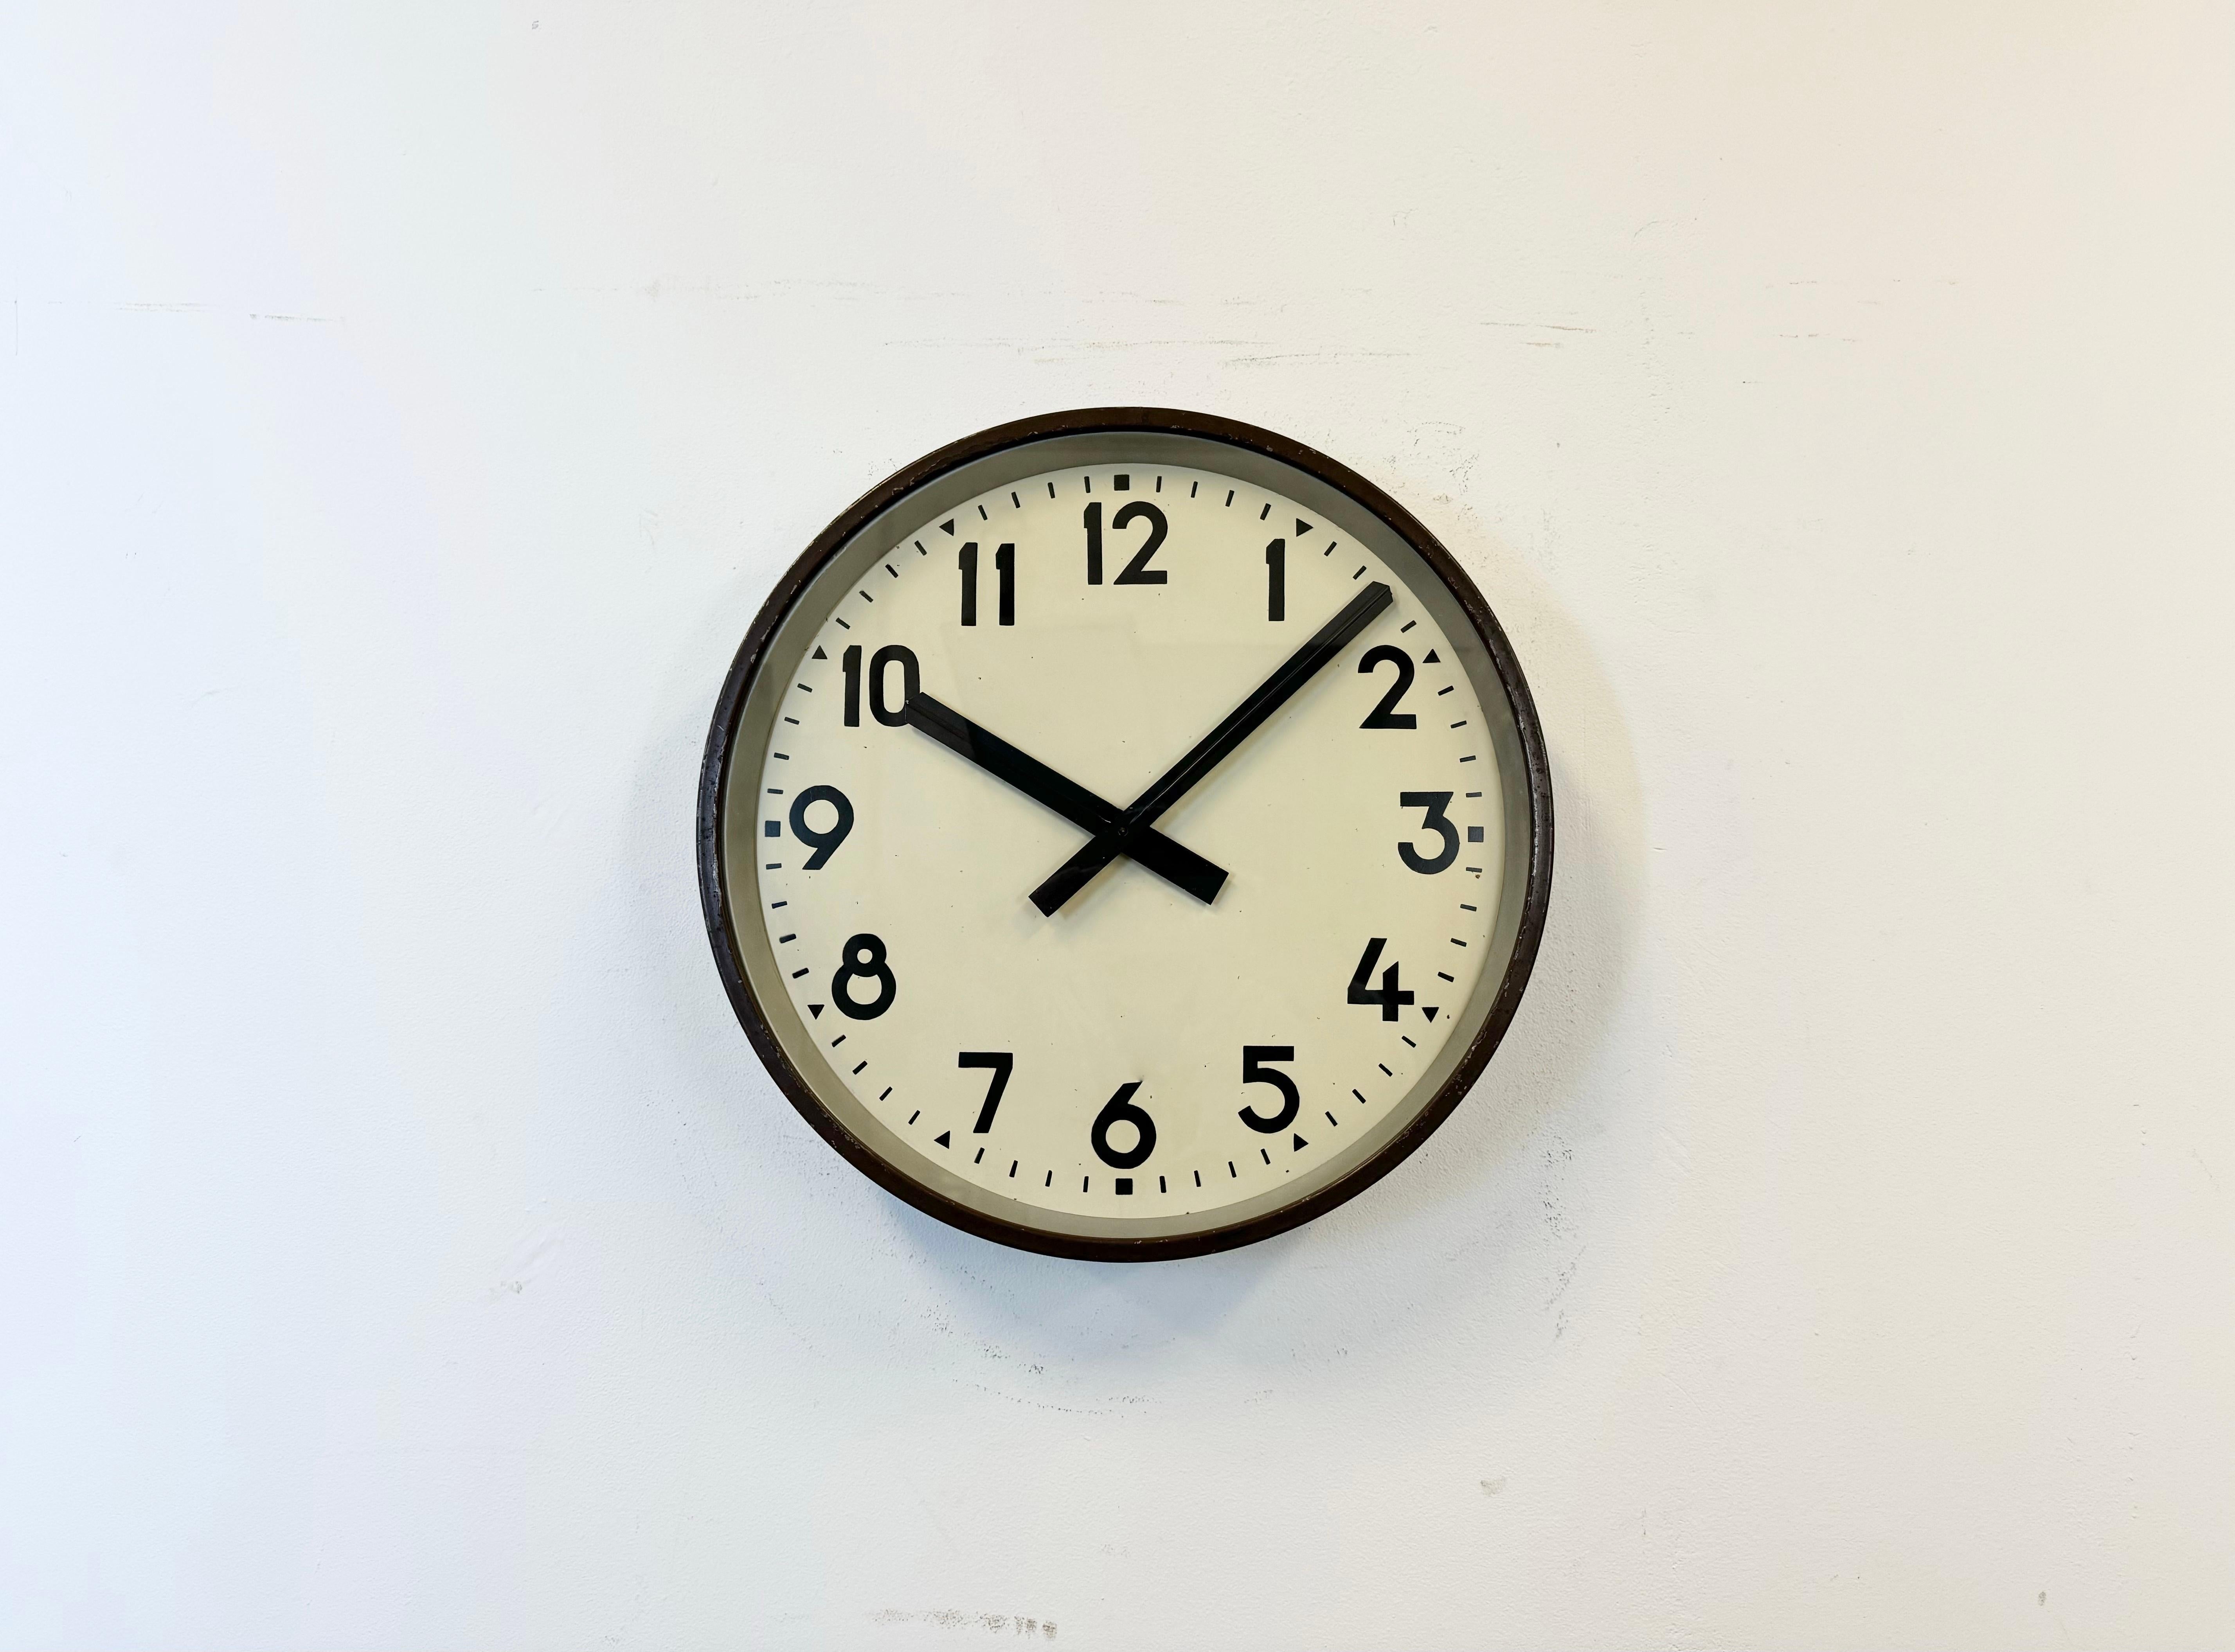 This factory wall clock was produced in former Czechoslovakia during the 1950s. It features a brown metal frame, iron dial, aluminum hands and clear glass cover. Former electrical slave clock has been converted into a battery-powered clockwork and